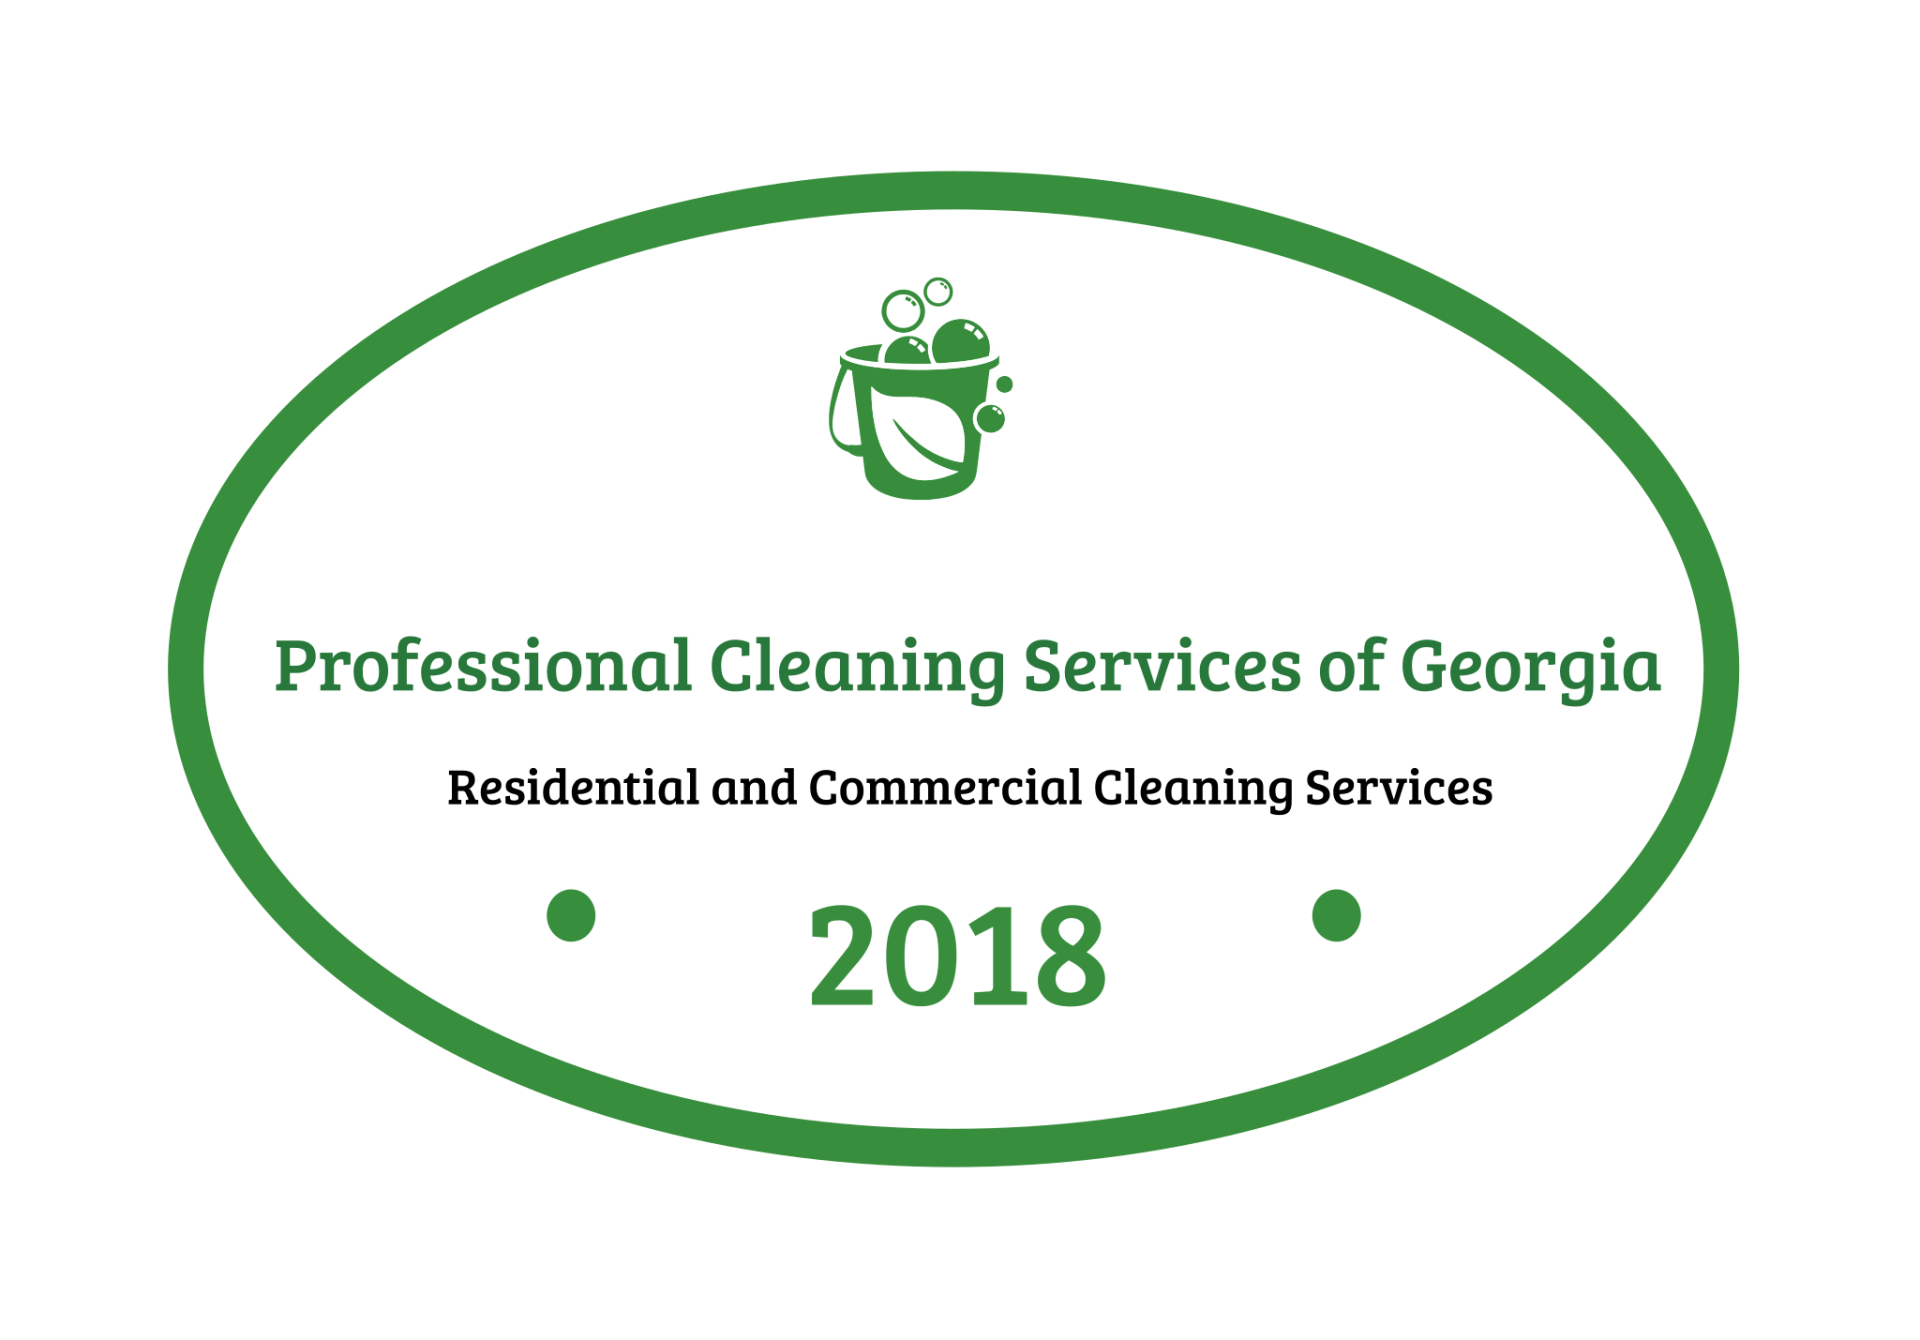 Professional Cleaning Services of Georgia, Inc